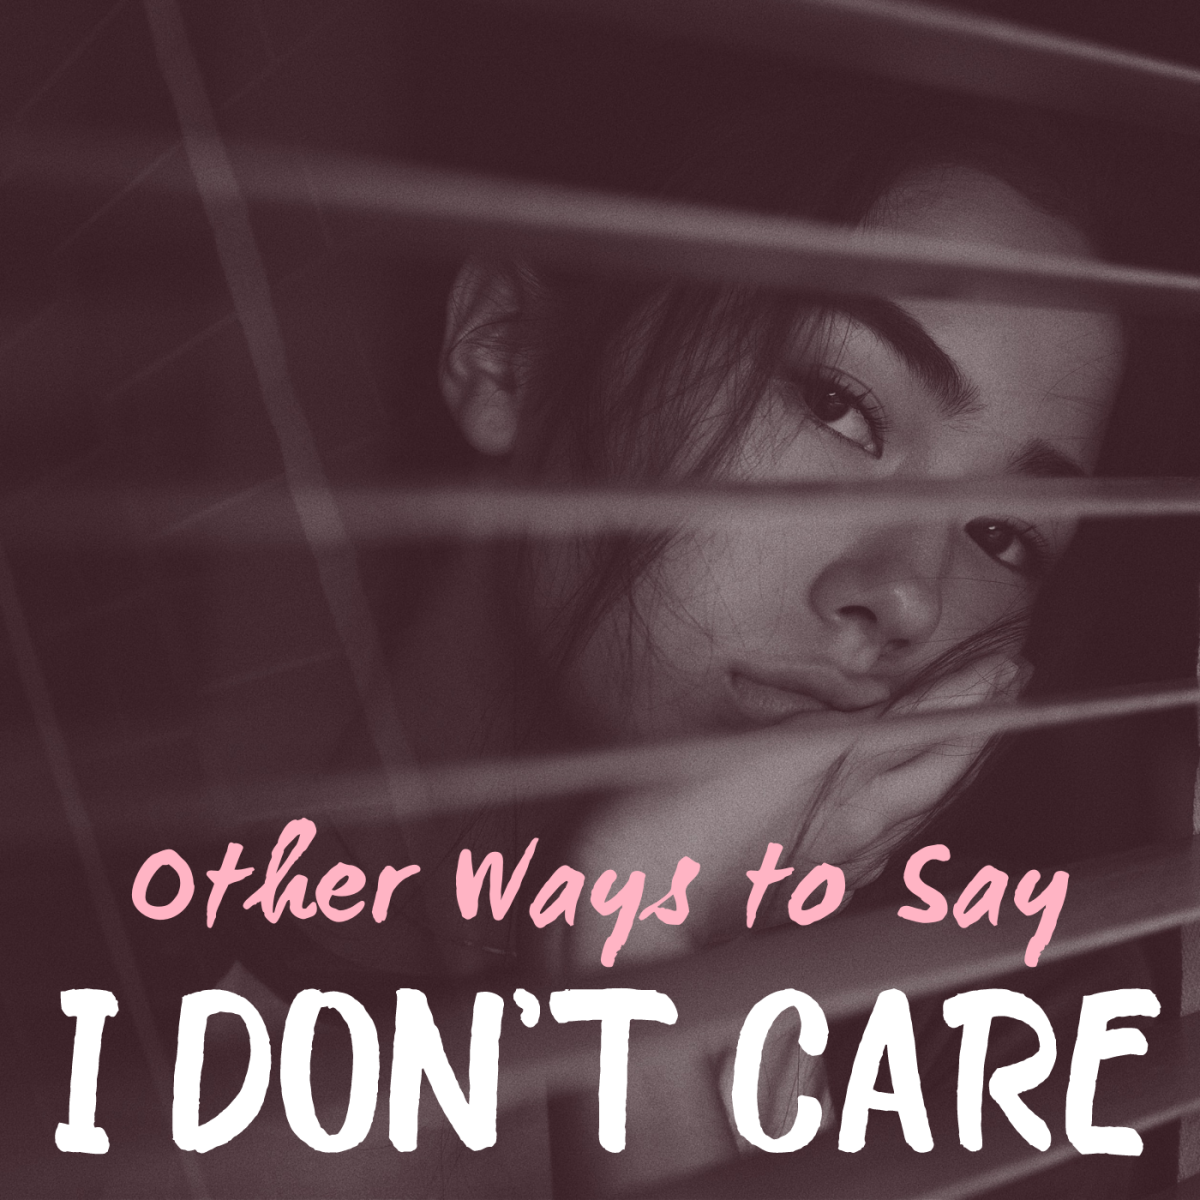 Just don't care? Try out these alternative ways of saying "I don't care" for some variety!